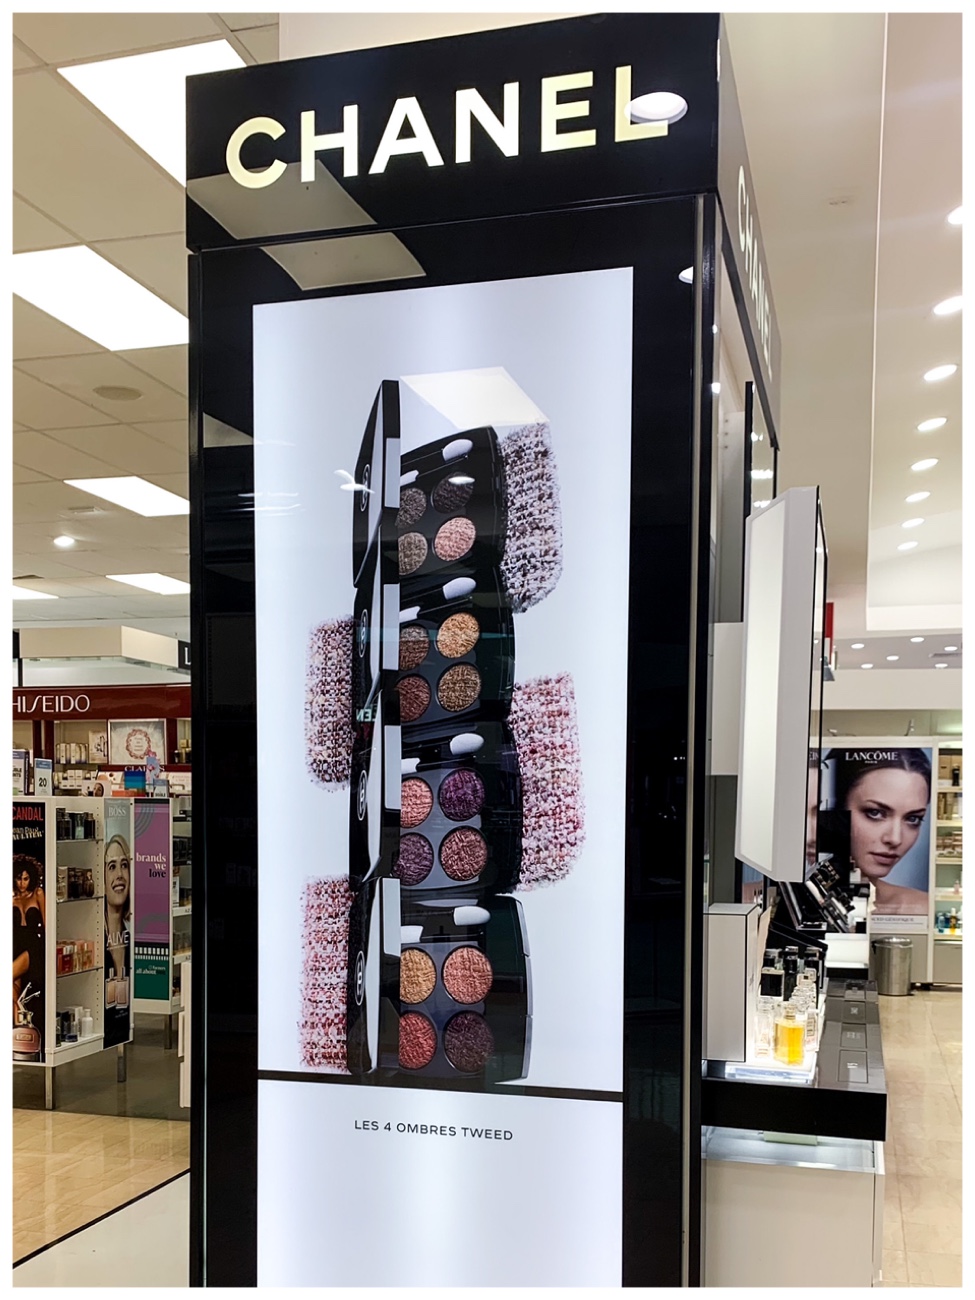 Chanel Beauty Takes Inspiration from Tweed in New Collection